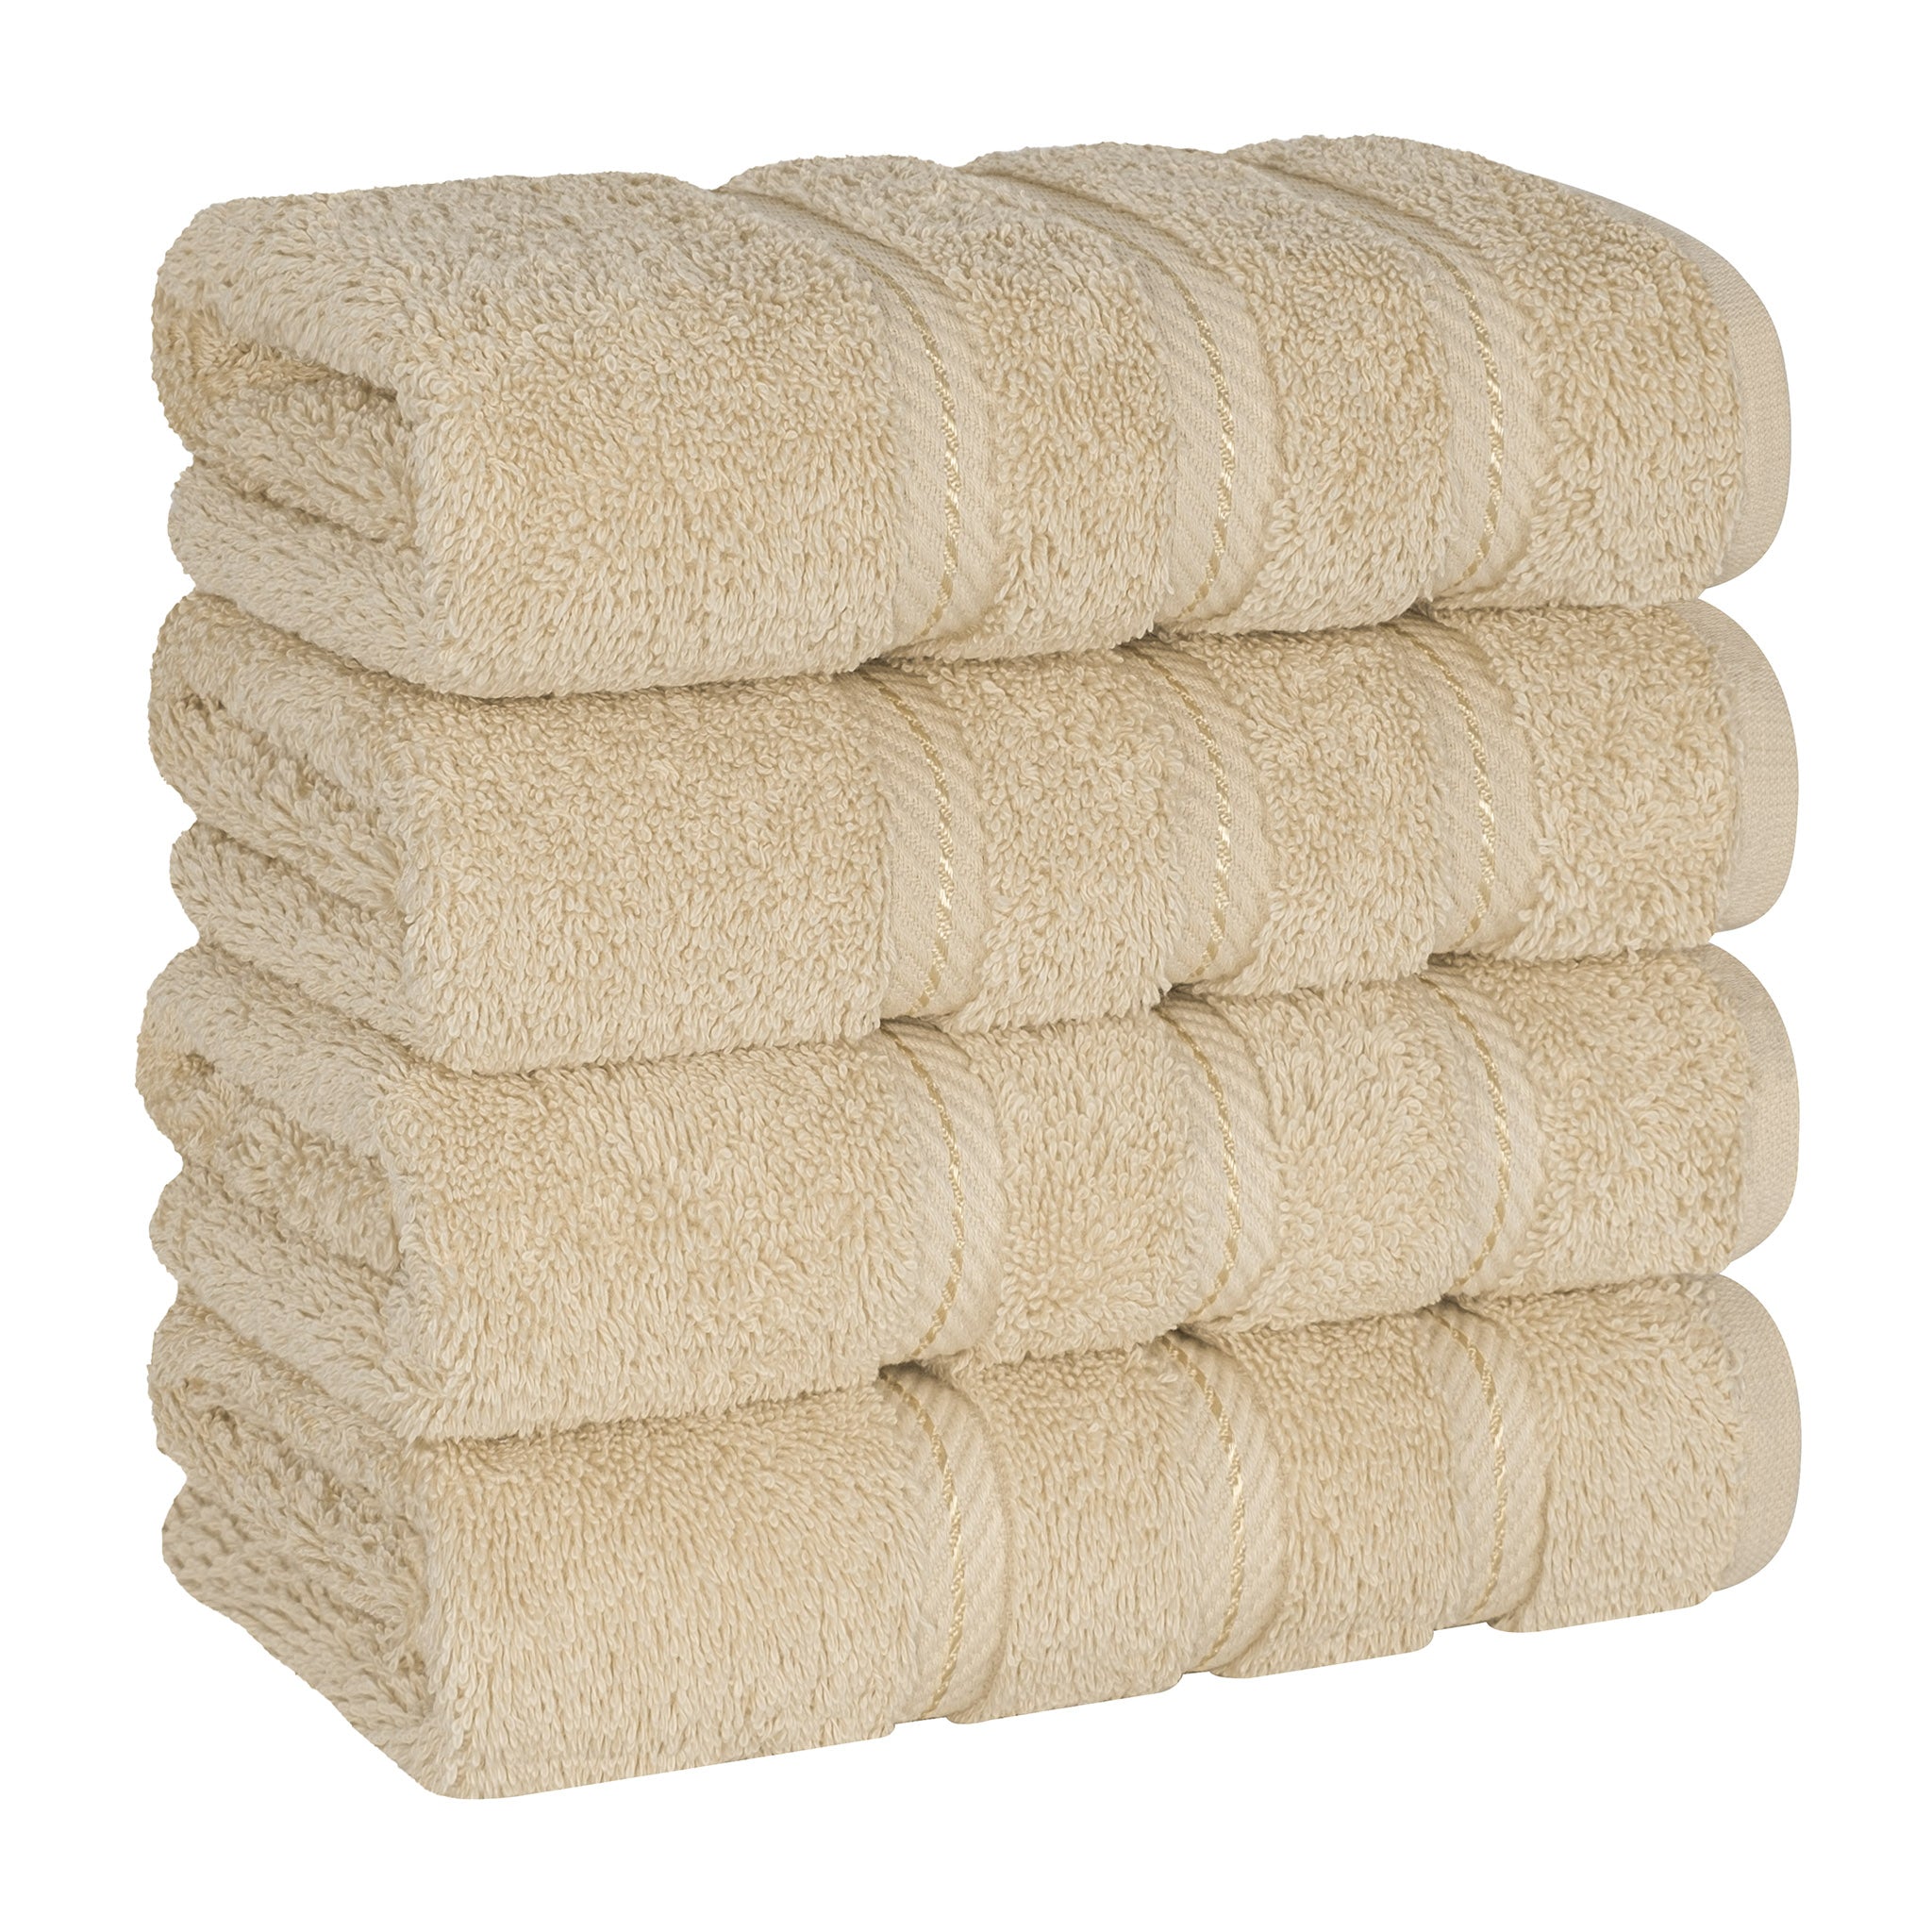  American Soft Linen 100% Turkish Cotton 4 Pack Hand Towel Set  sand-taupe-1